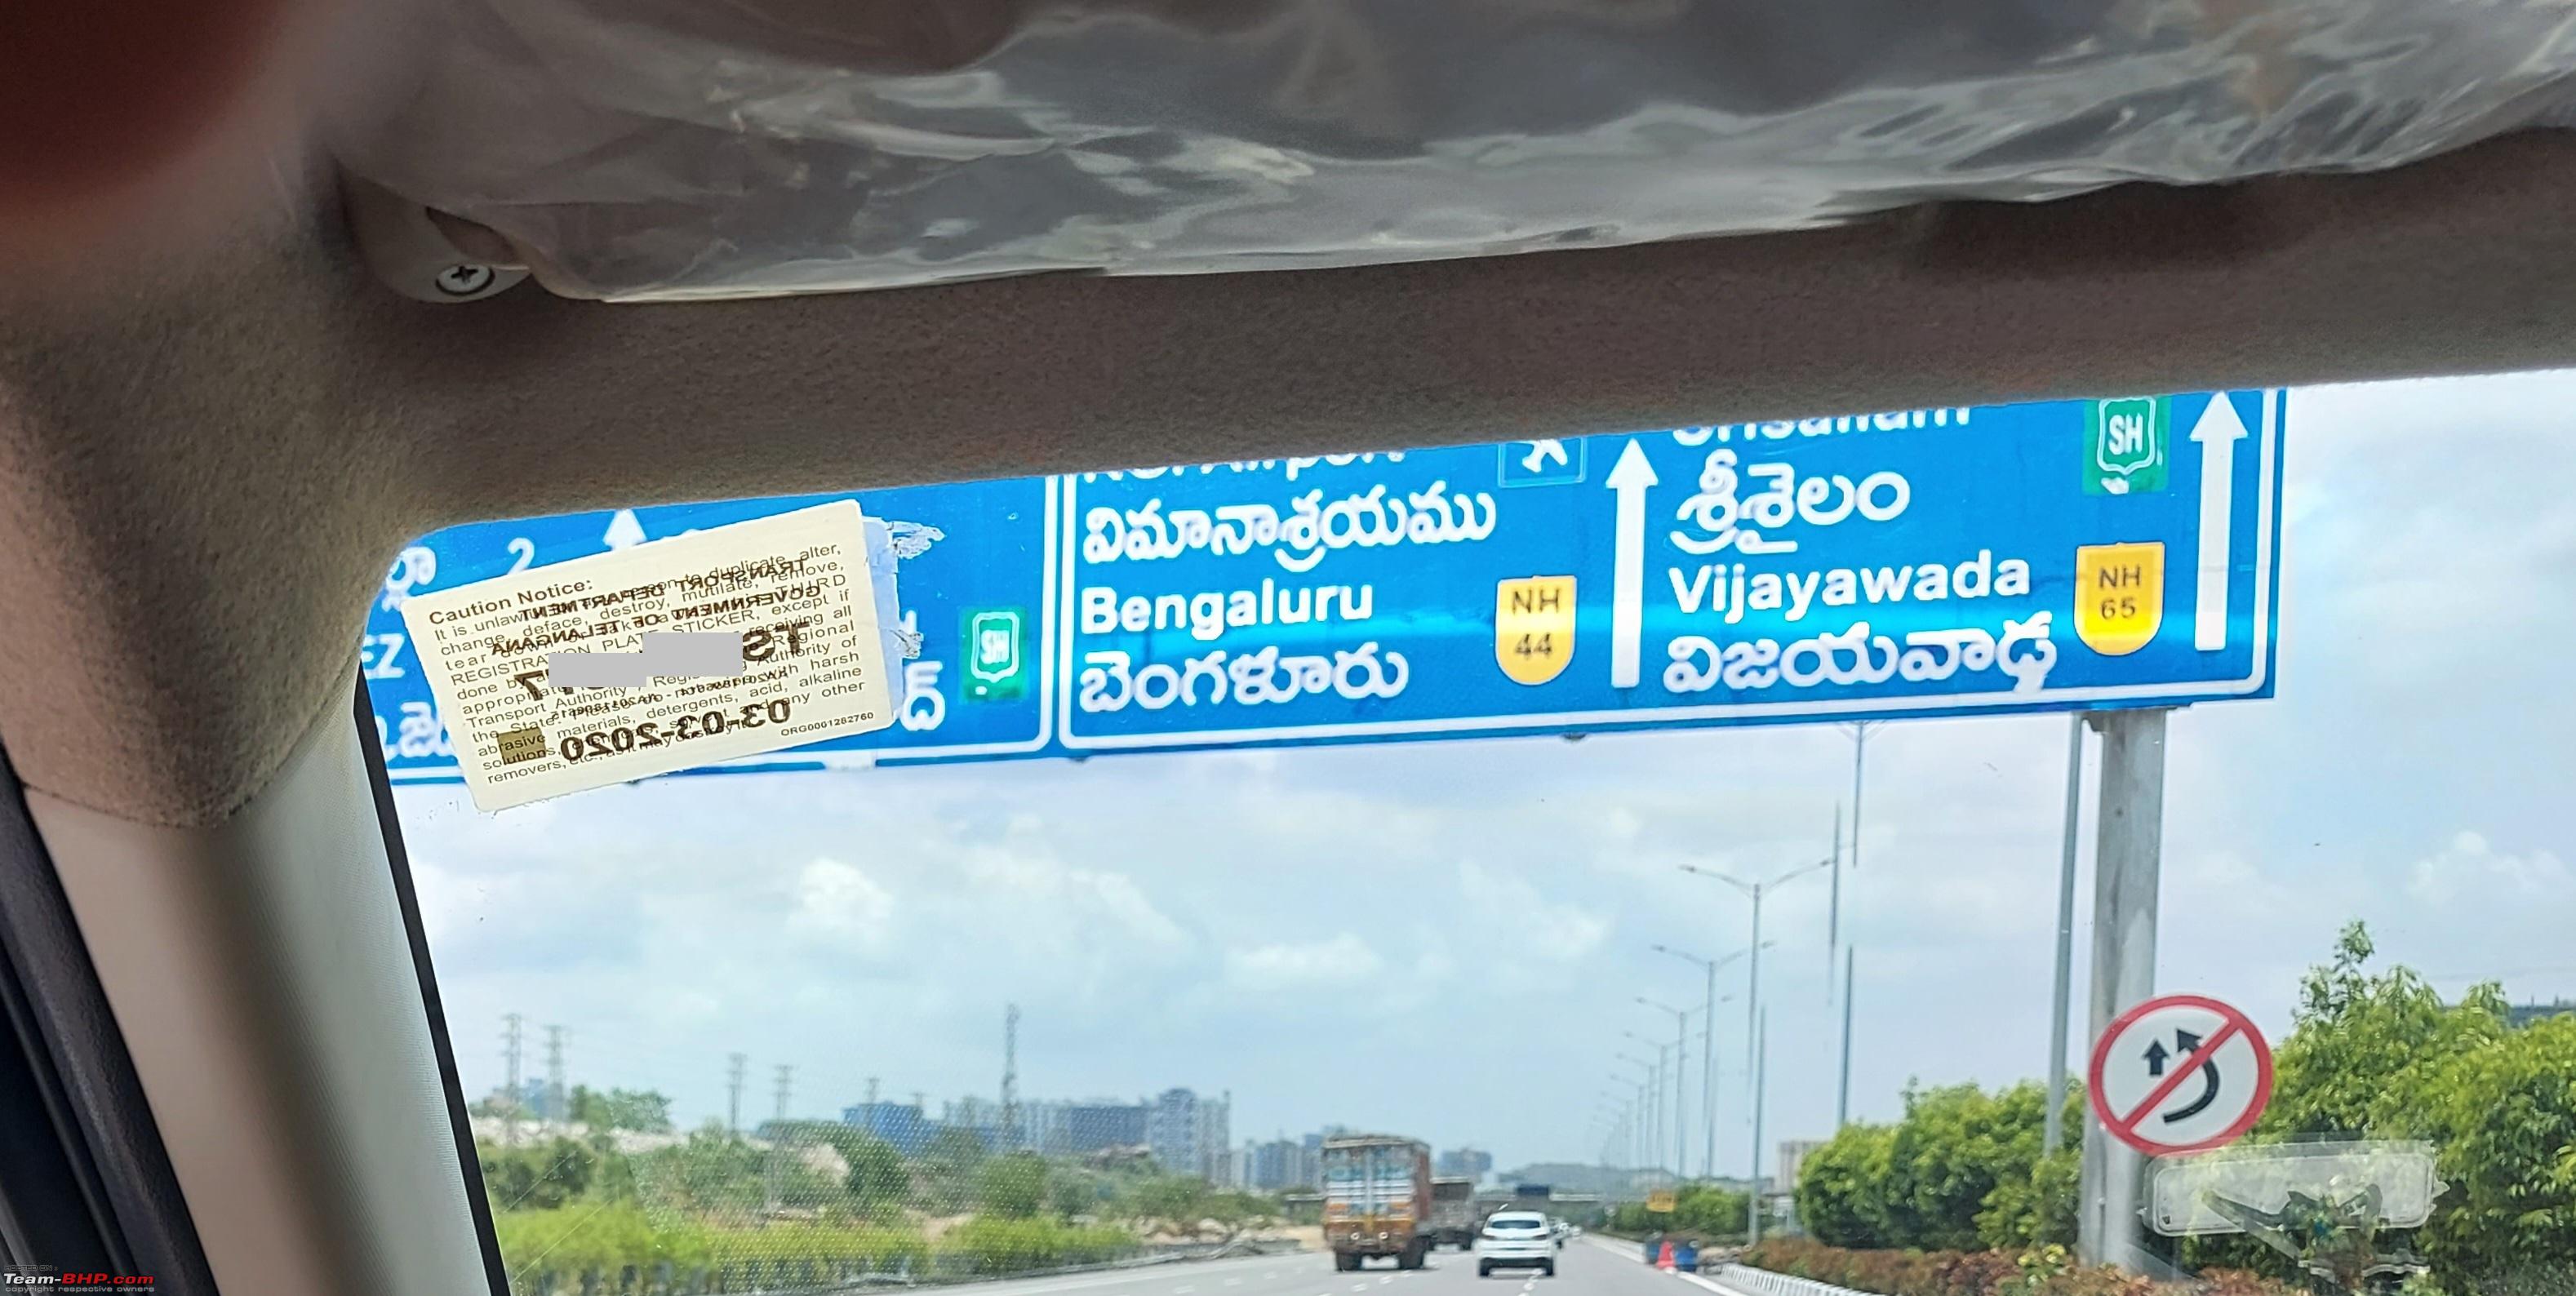 An Over View On Hyderabad Exit Number 3- Patancheru